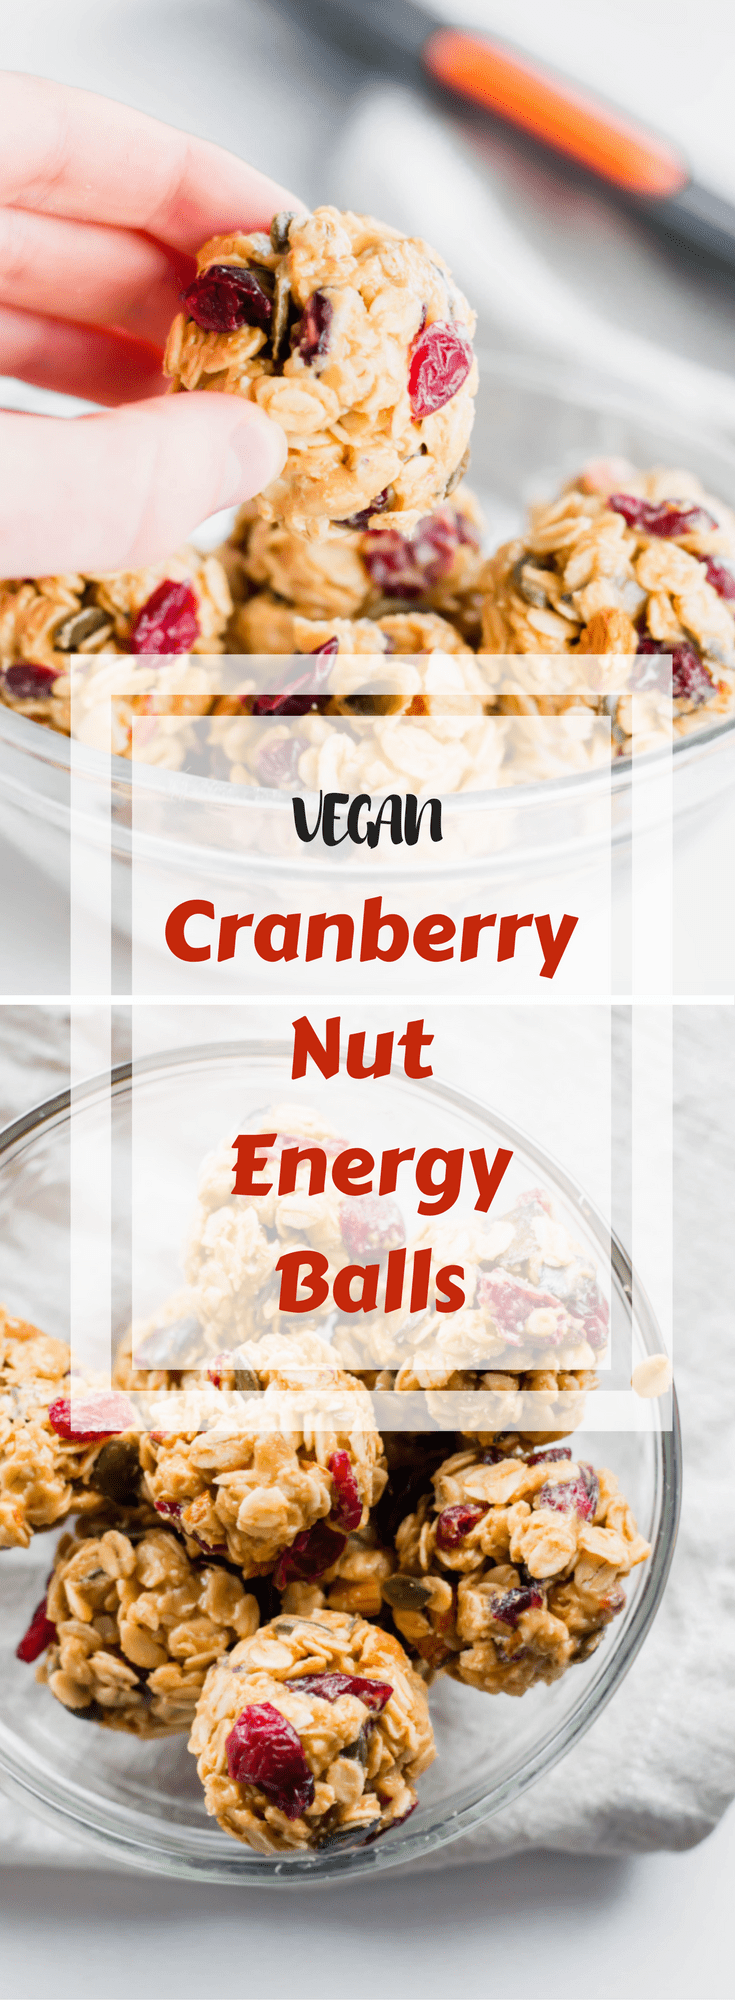 These Cranberry Nut Energy Balls are the perfect vegan, gluten-free snack. They require one bowl to make, are packed with protein and will satisfy that sweet tooth.